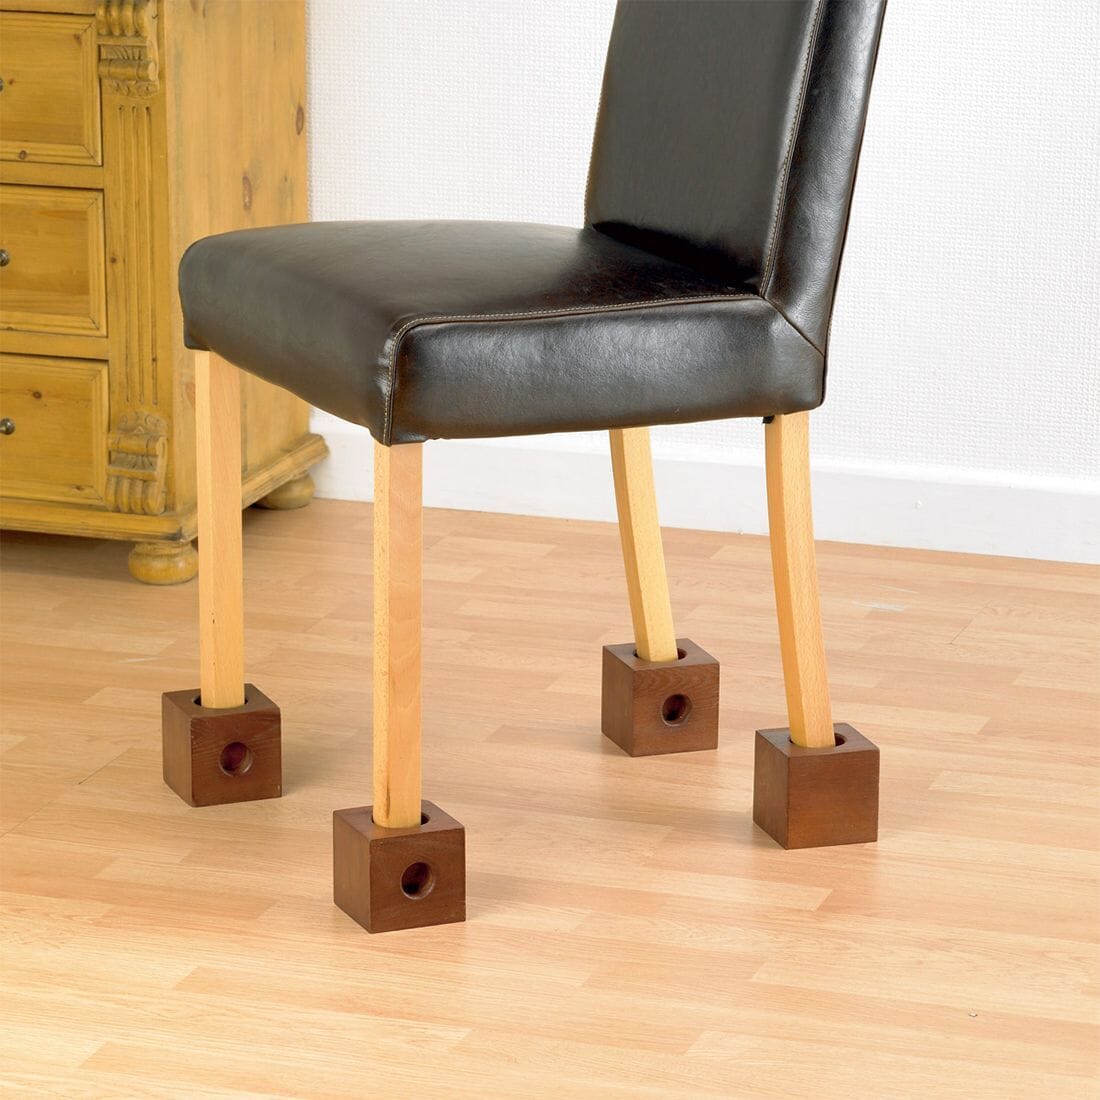 View Wooden Chair Raisers information